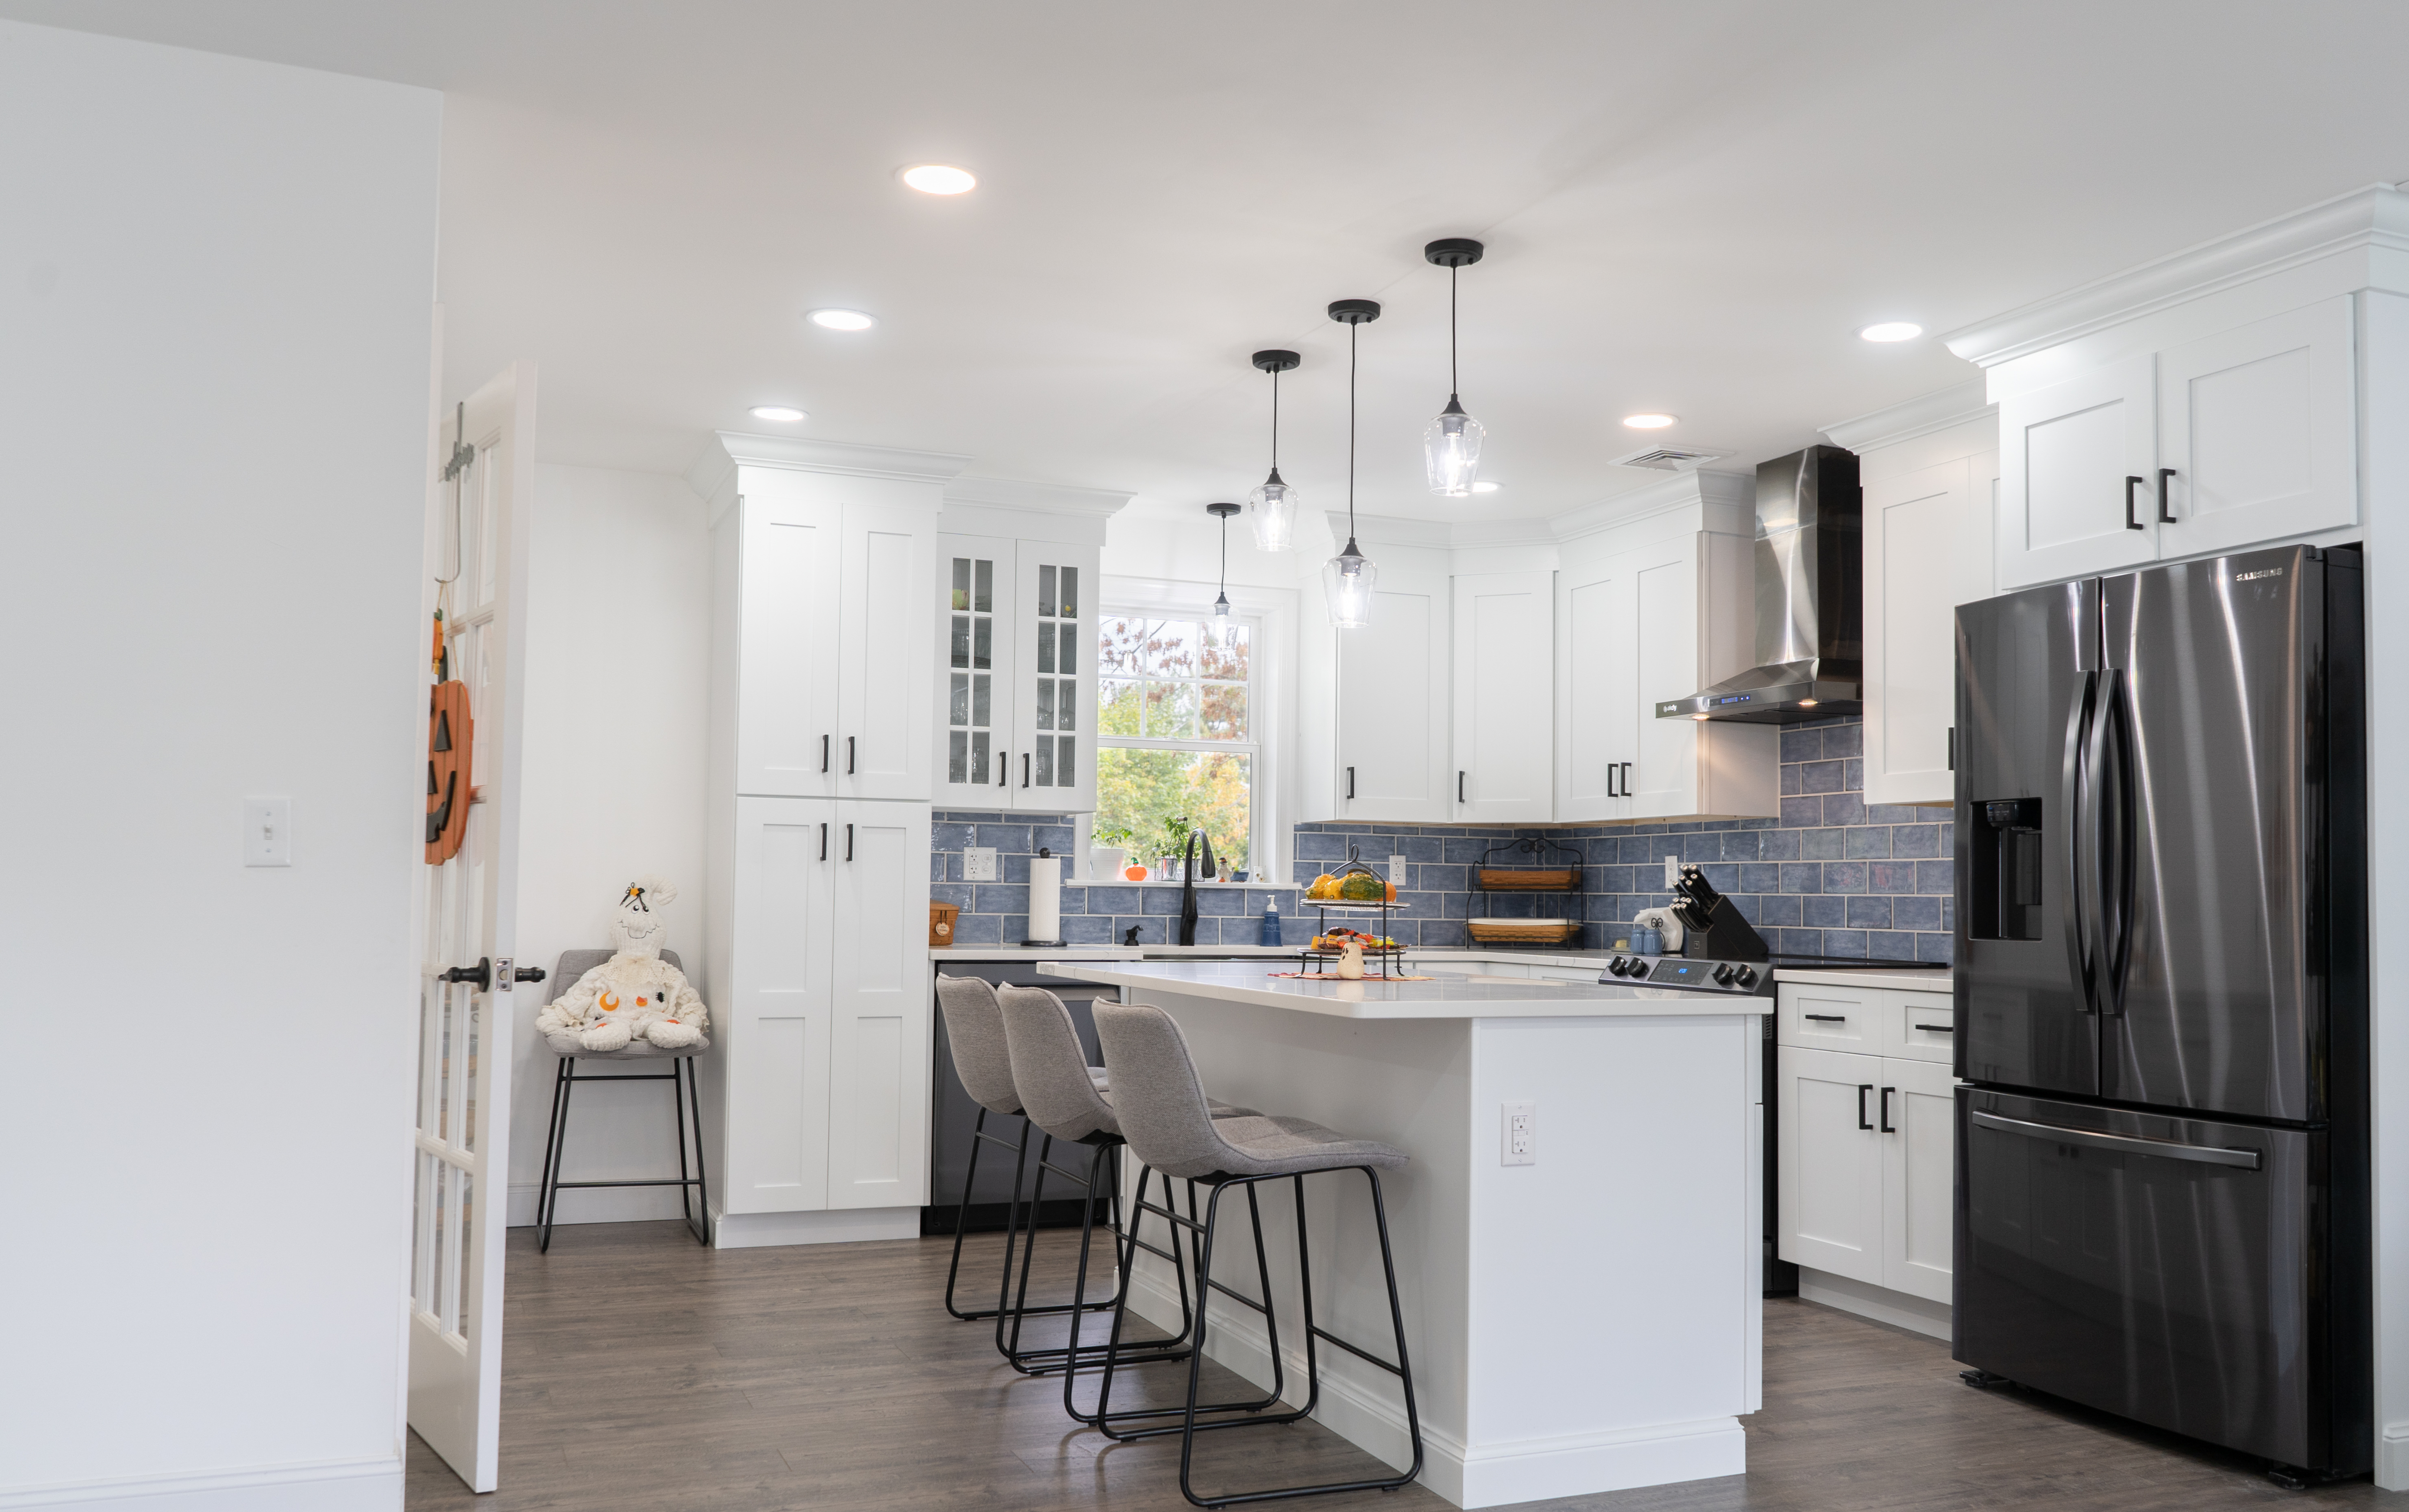 Remodeled kitchen with white cabinetry and black trim